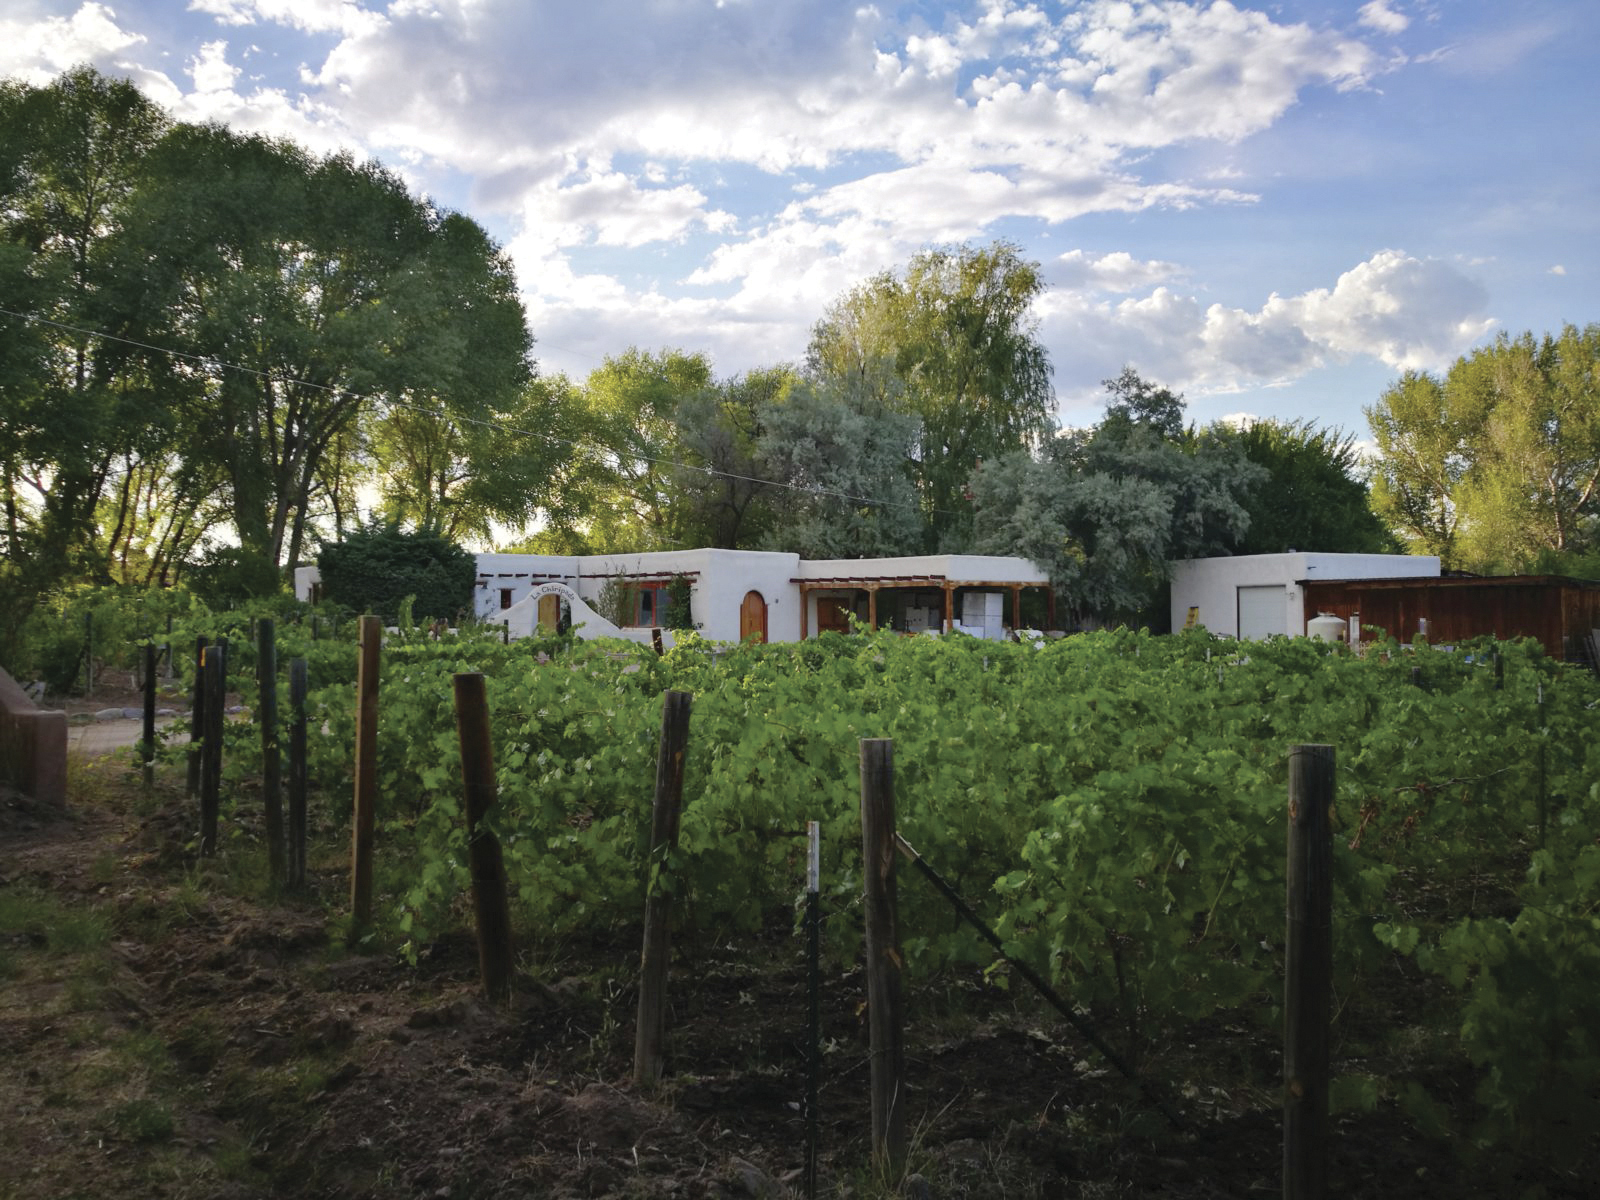 New Mexico’s Wine Region: Searching for Style